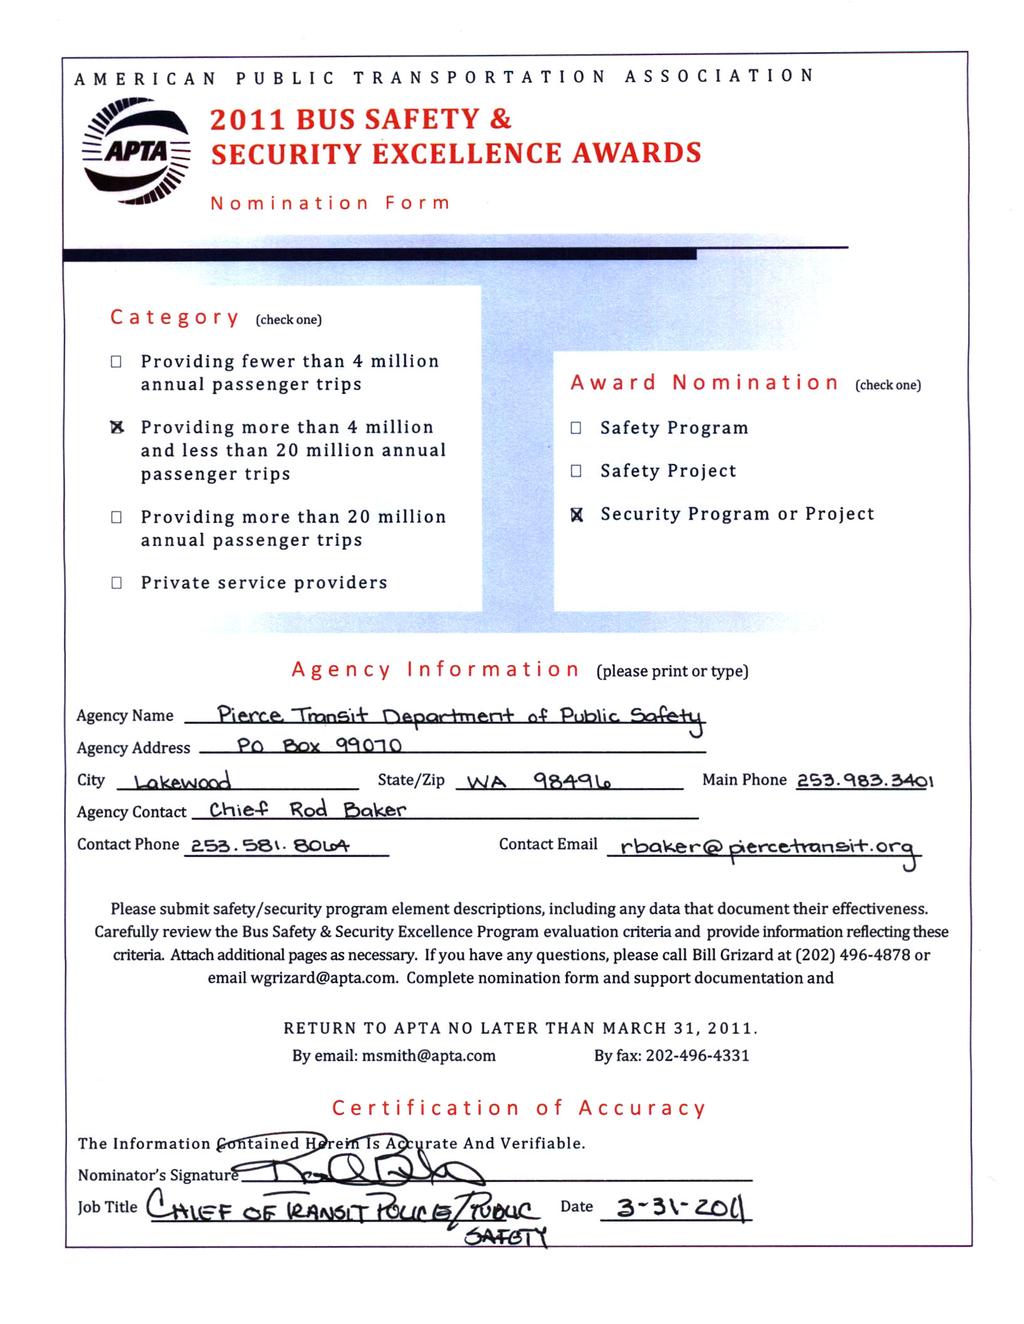 AMERICAN PUBLIC TRANSPORTATION ASSOCIATION OSP 2011 BUS SAFETY & =APTA-=== SECURITY EXCELLENCE AWARDS Nomination Form Category (check one) 0 Providing fewer than 4 million annual passenger trips IX.